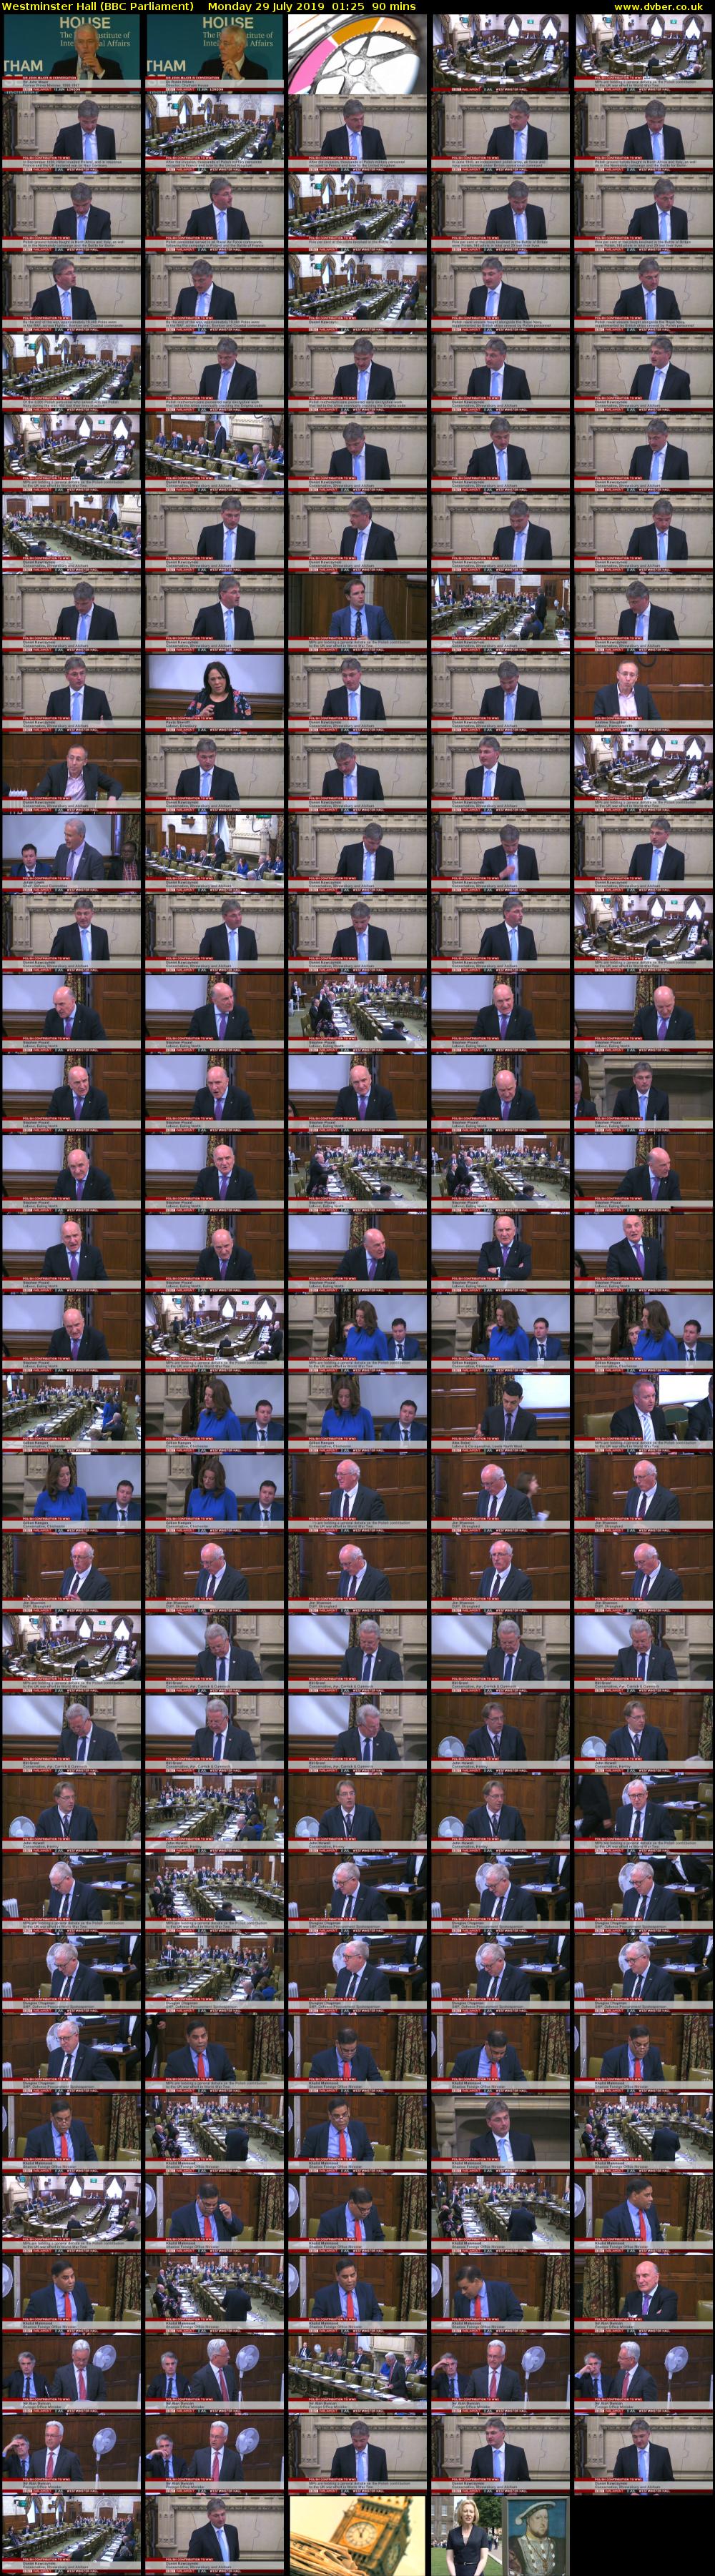 Westminster Hall (BBC Parliament) Monday 29 July 2019 01:25 - 02:55